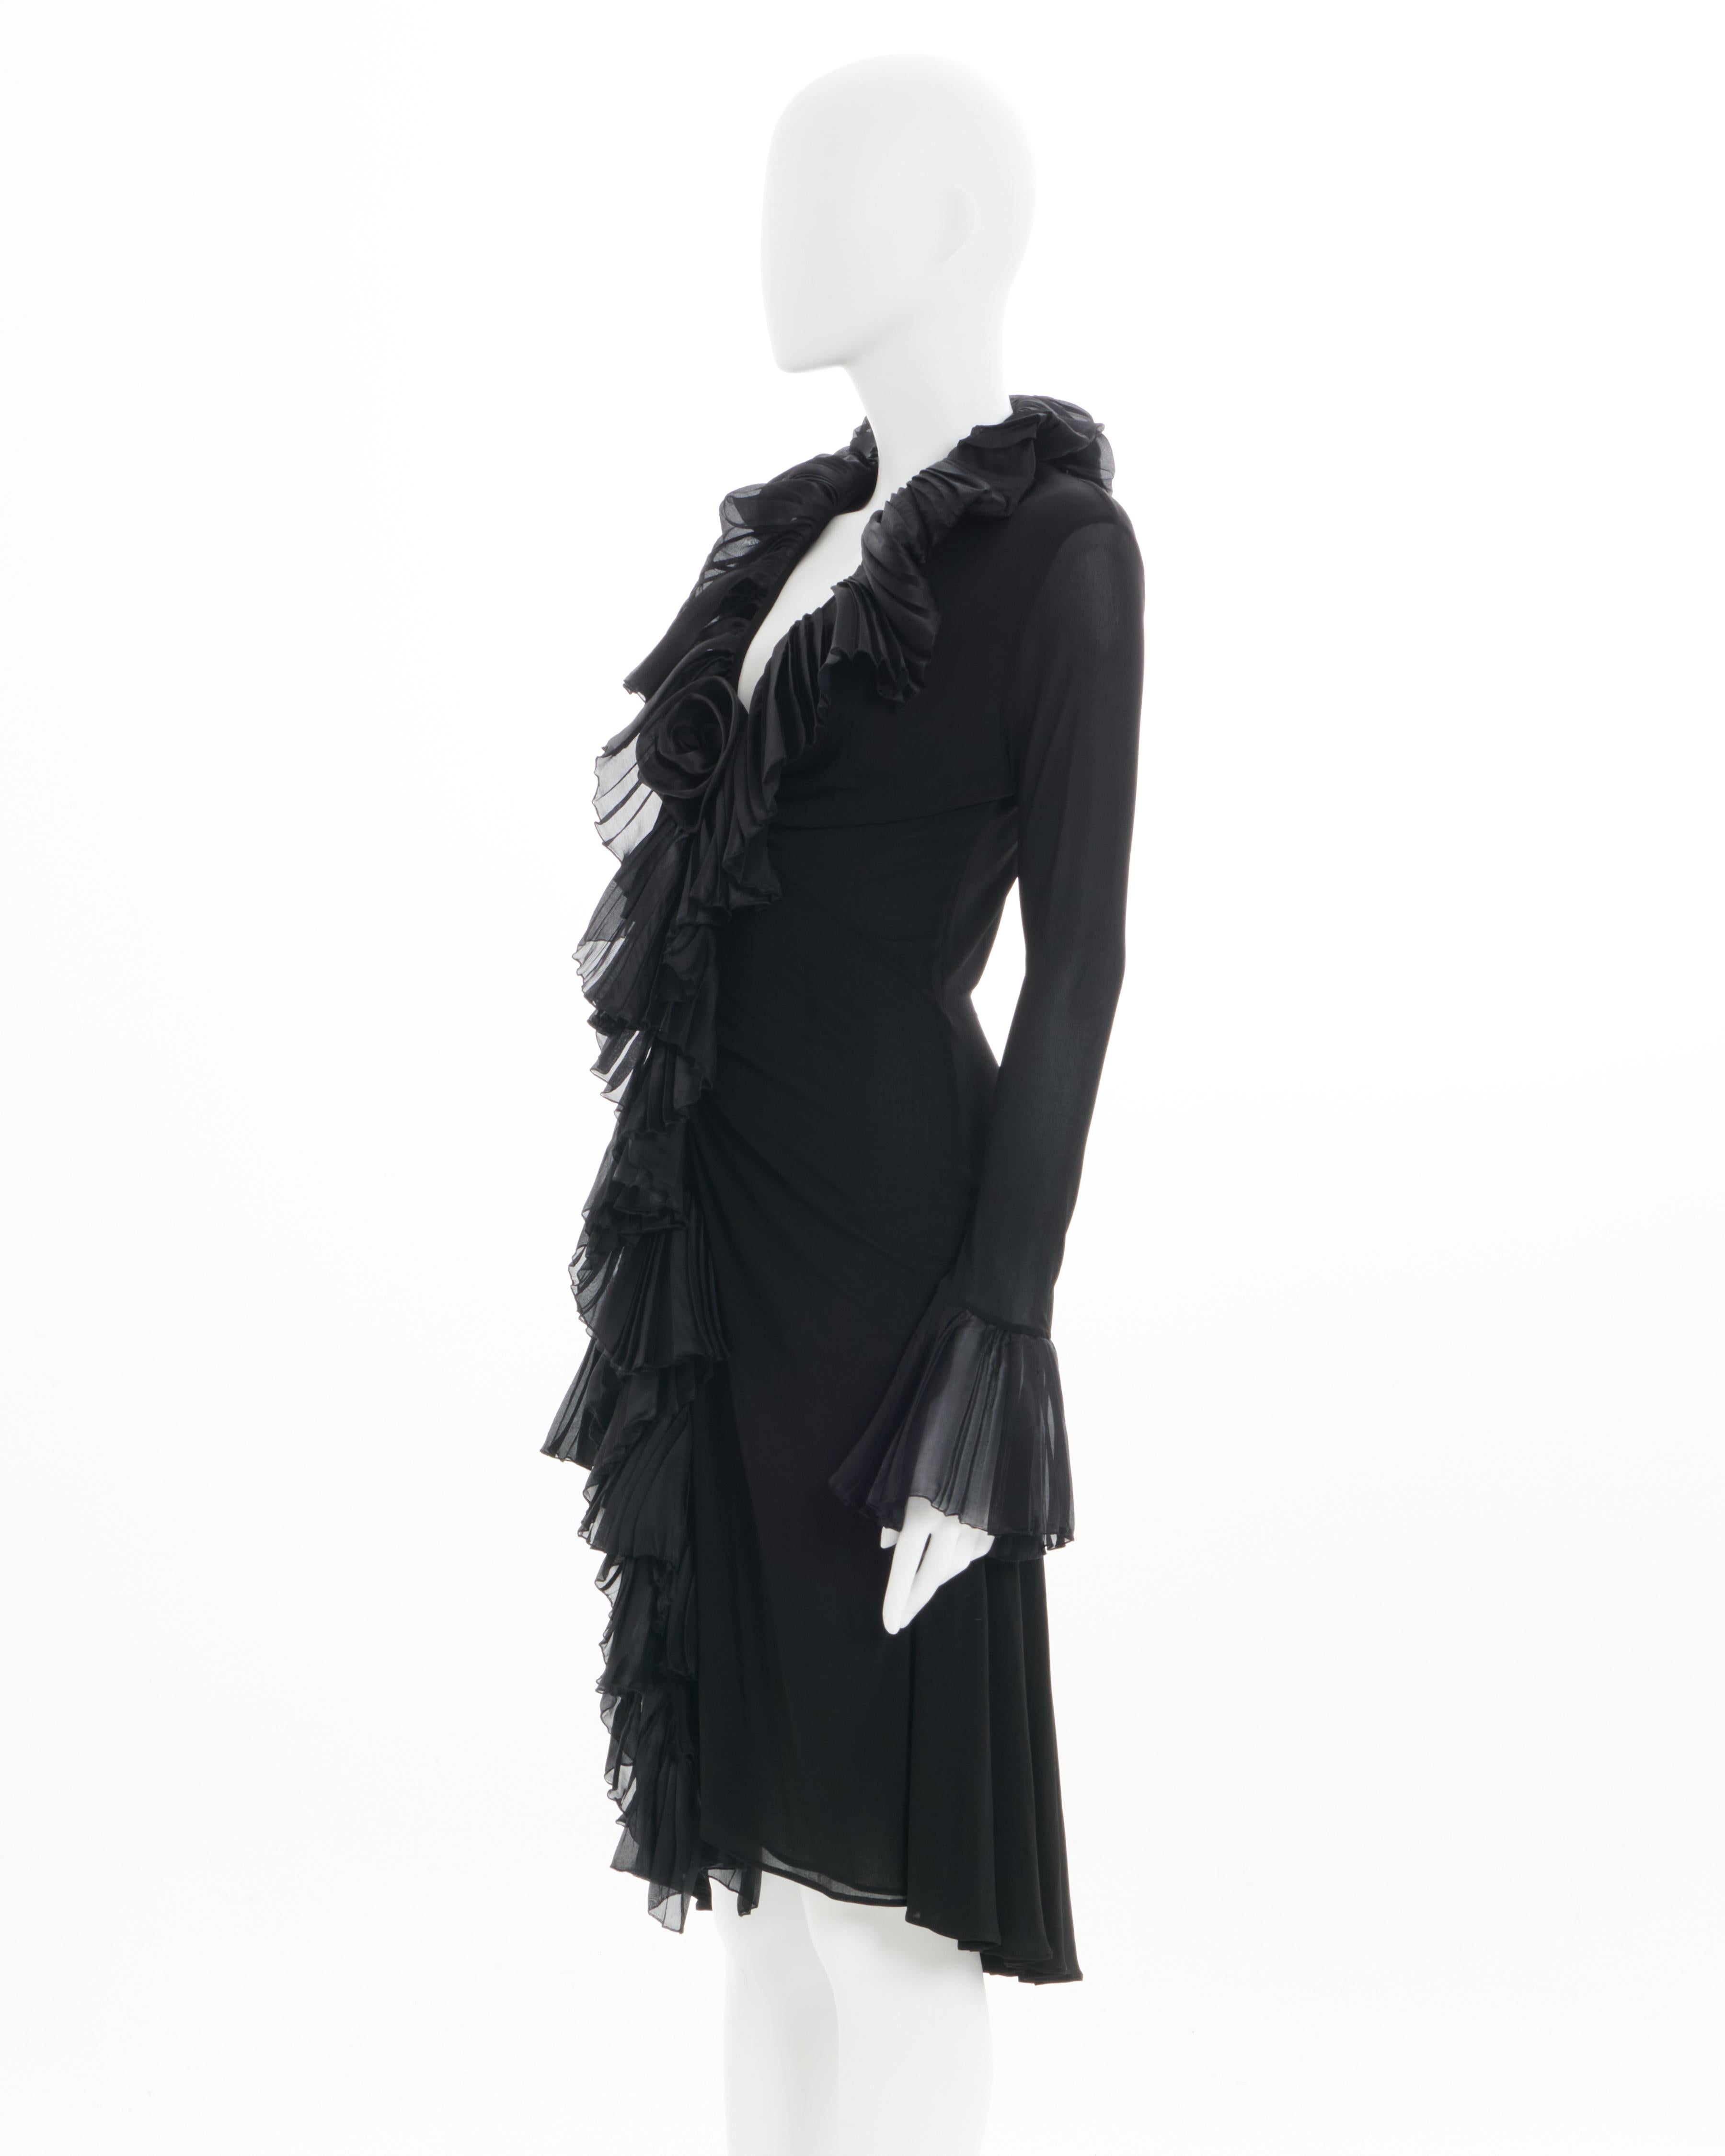 - Roberto Cavalli
- Sold by Skof.Archive
- Spring - Summer 2006 
- Black ruffle cocktail dress 
- Frontal hook-and-eye closure 
- V-neck
- Above knee-length 
- Fitted to the body 
- Size: Size: FR 40 - EN 44 - UK 12 - US 8 
- Fabric: Viscose & Silk